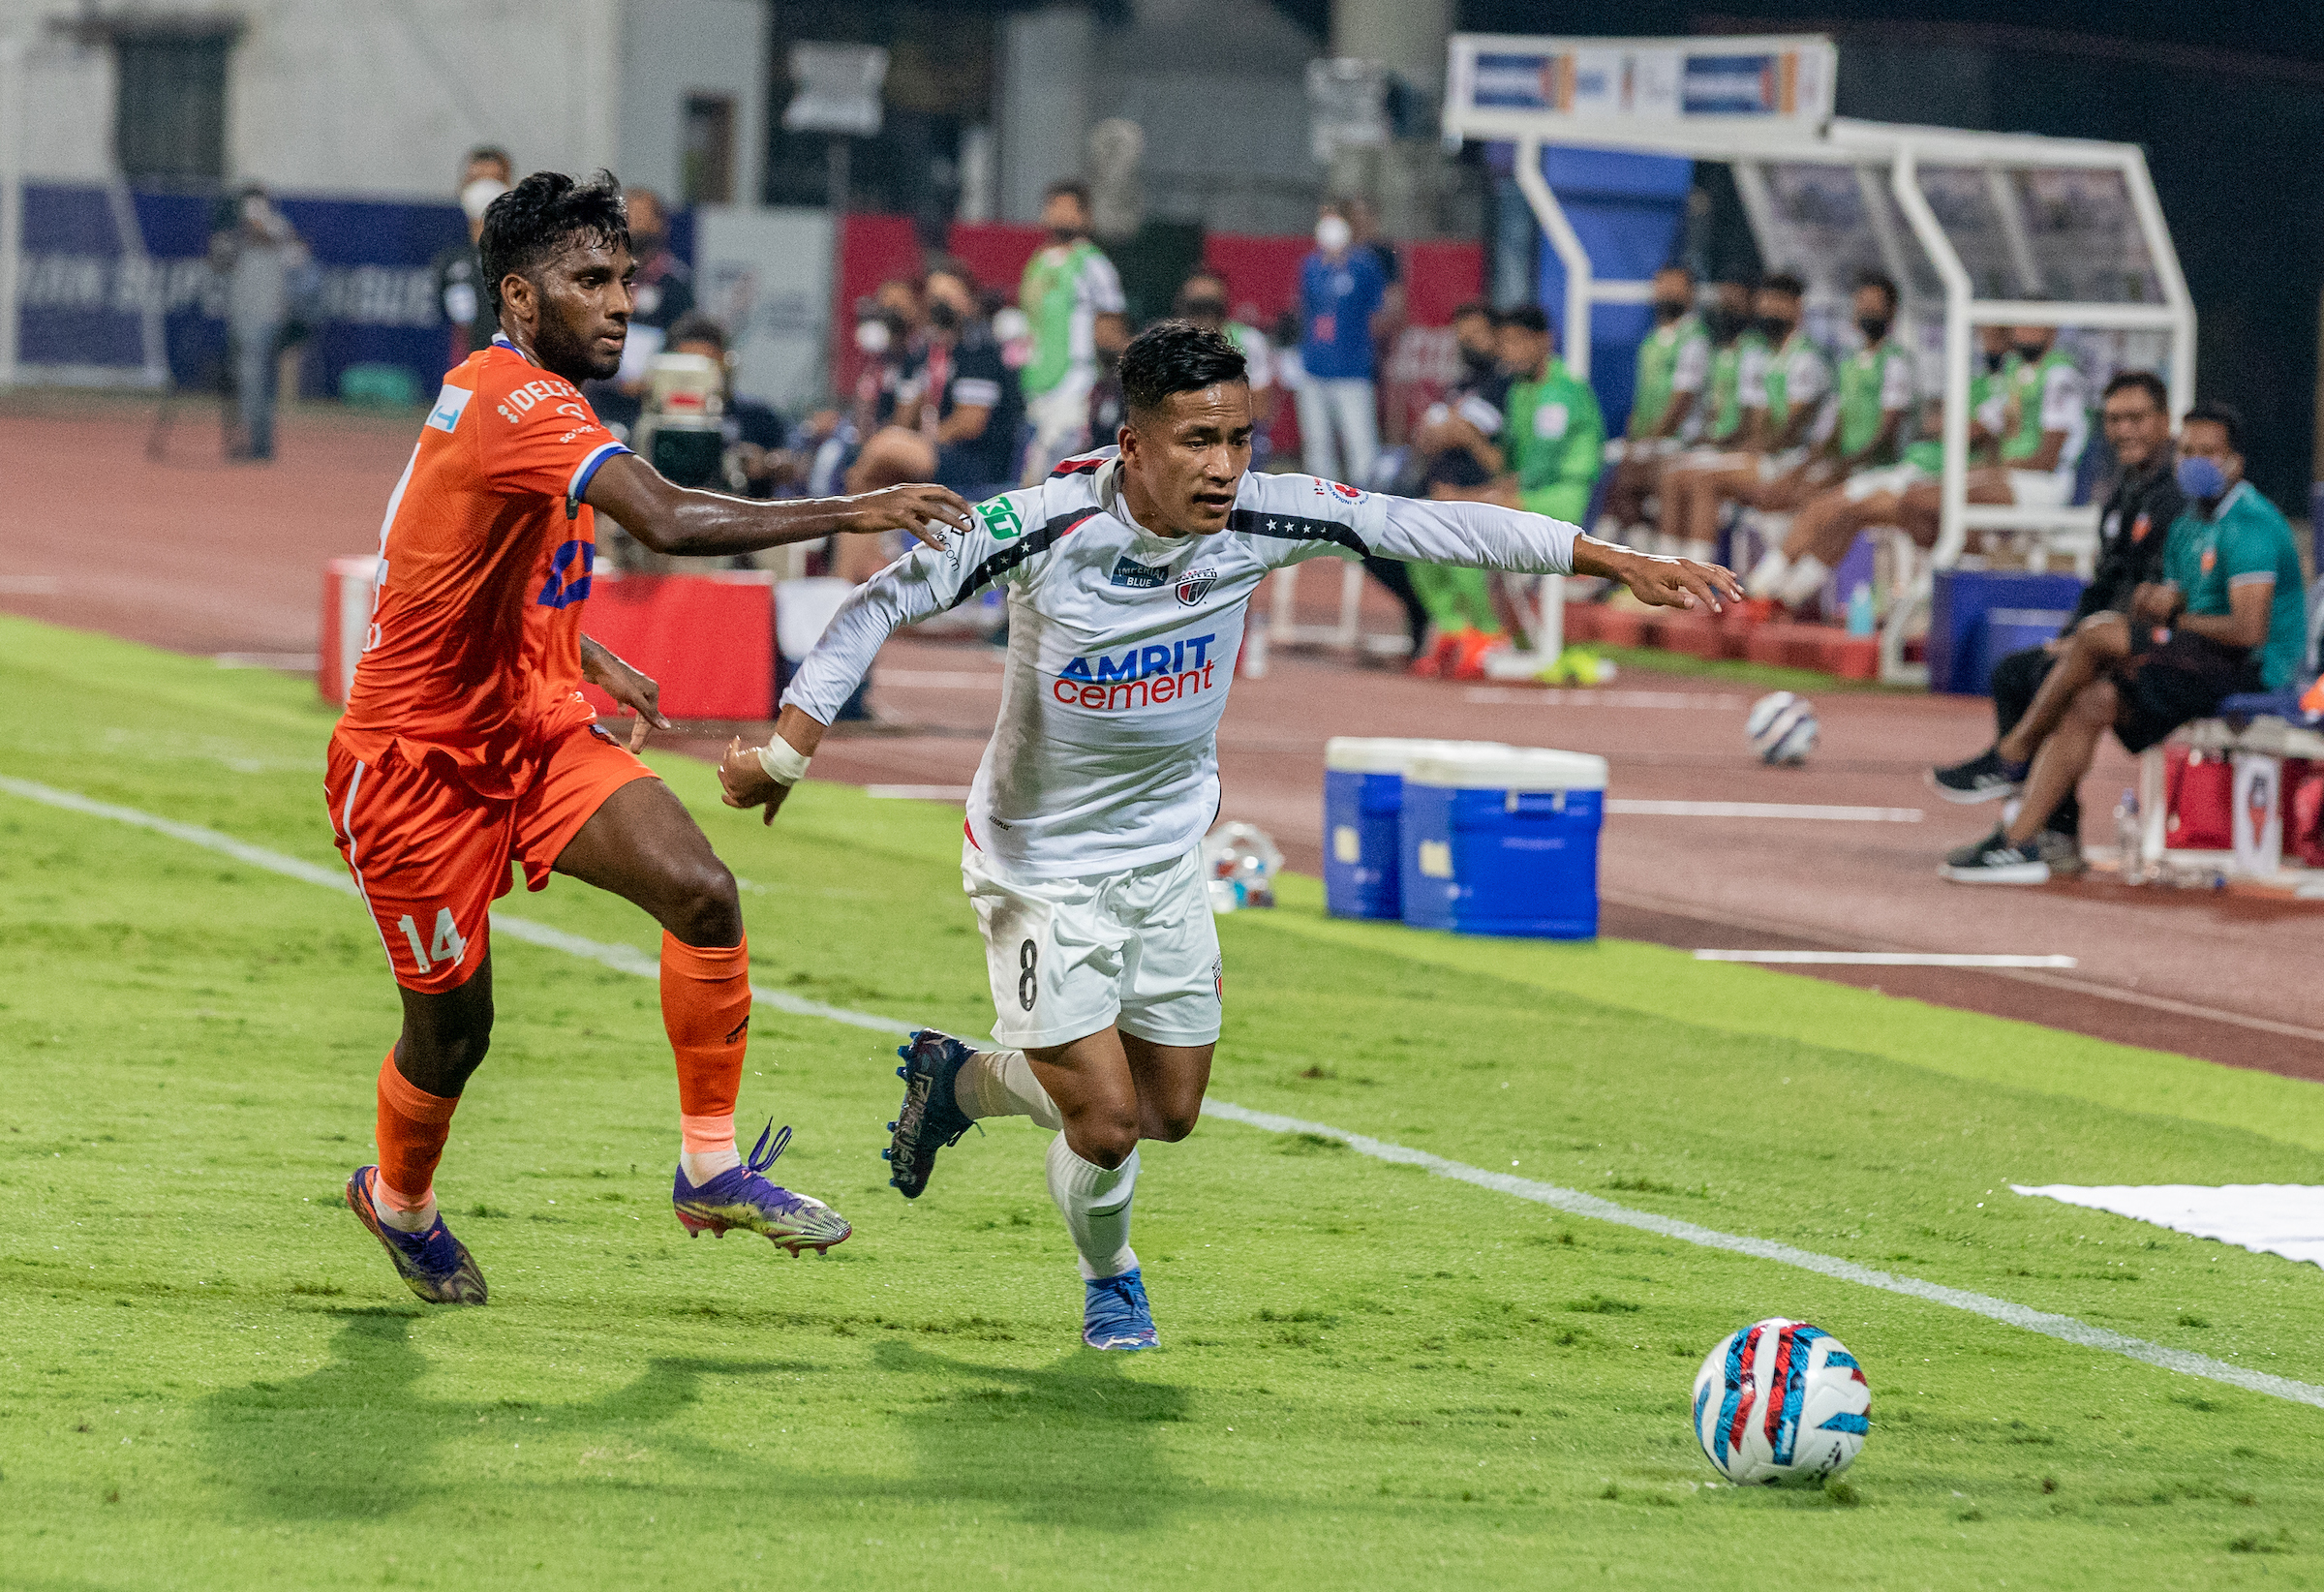 ISL Season 8: Concentration and hardwok the mantra to get back to winning ways says Northeast United head coach Khalid Jamil after draw against FC Goa